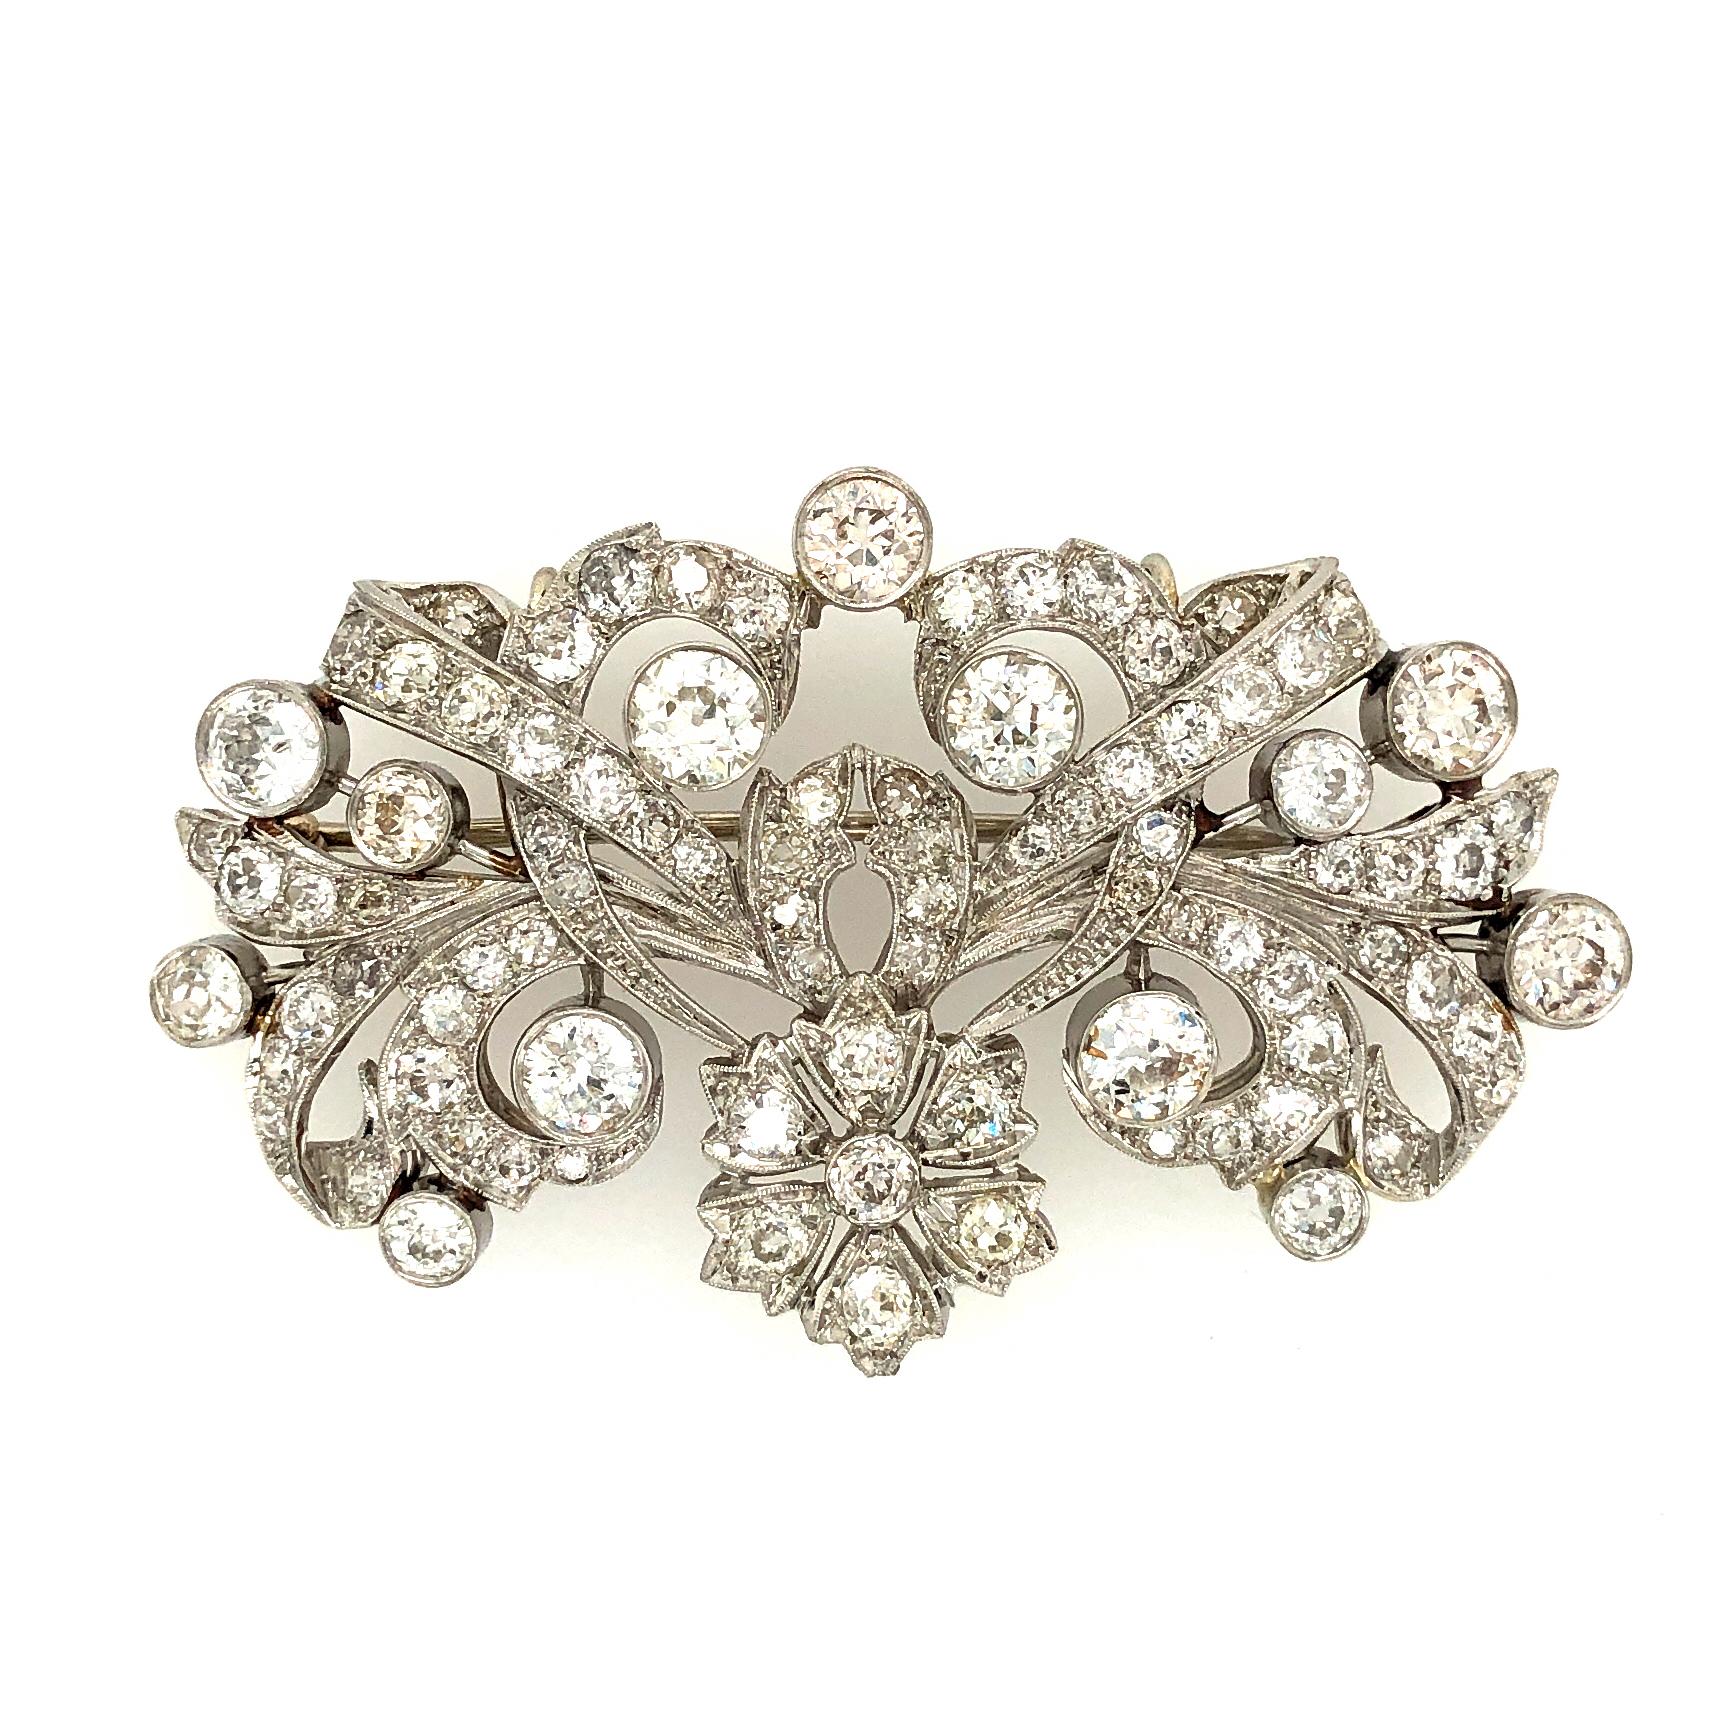 Offered here is an unique platinum diamond brooch. The brooch is in great condition for its age ( estimated 1960’s- 70’s ). All the diamonds in the brooch are old European cut and old mine cut G-H color Vs2-Si1 some I1 in clarity with an estimated